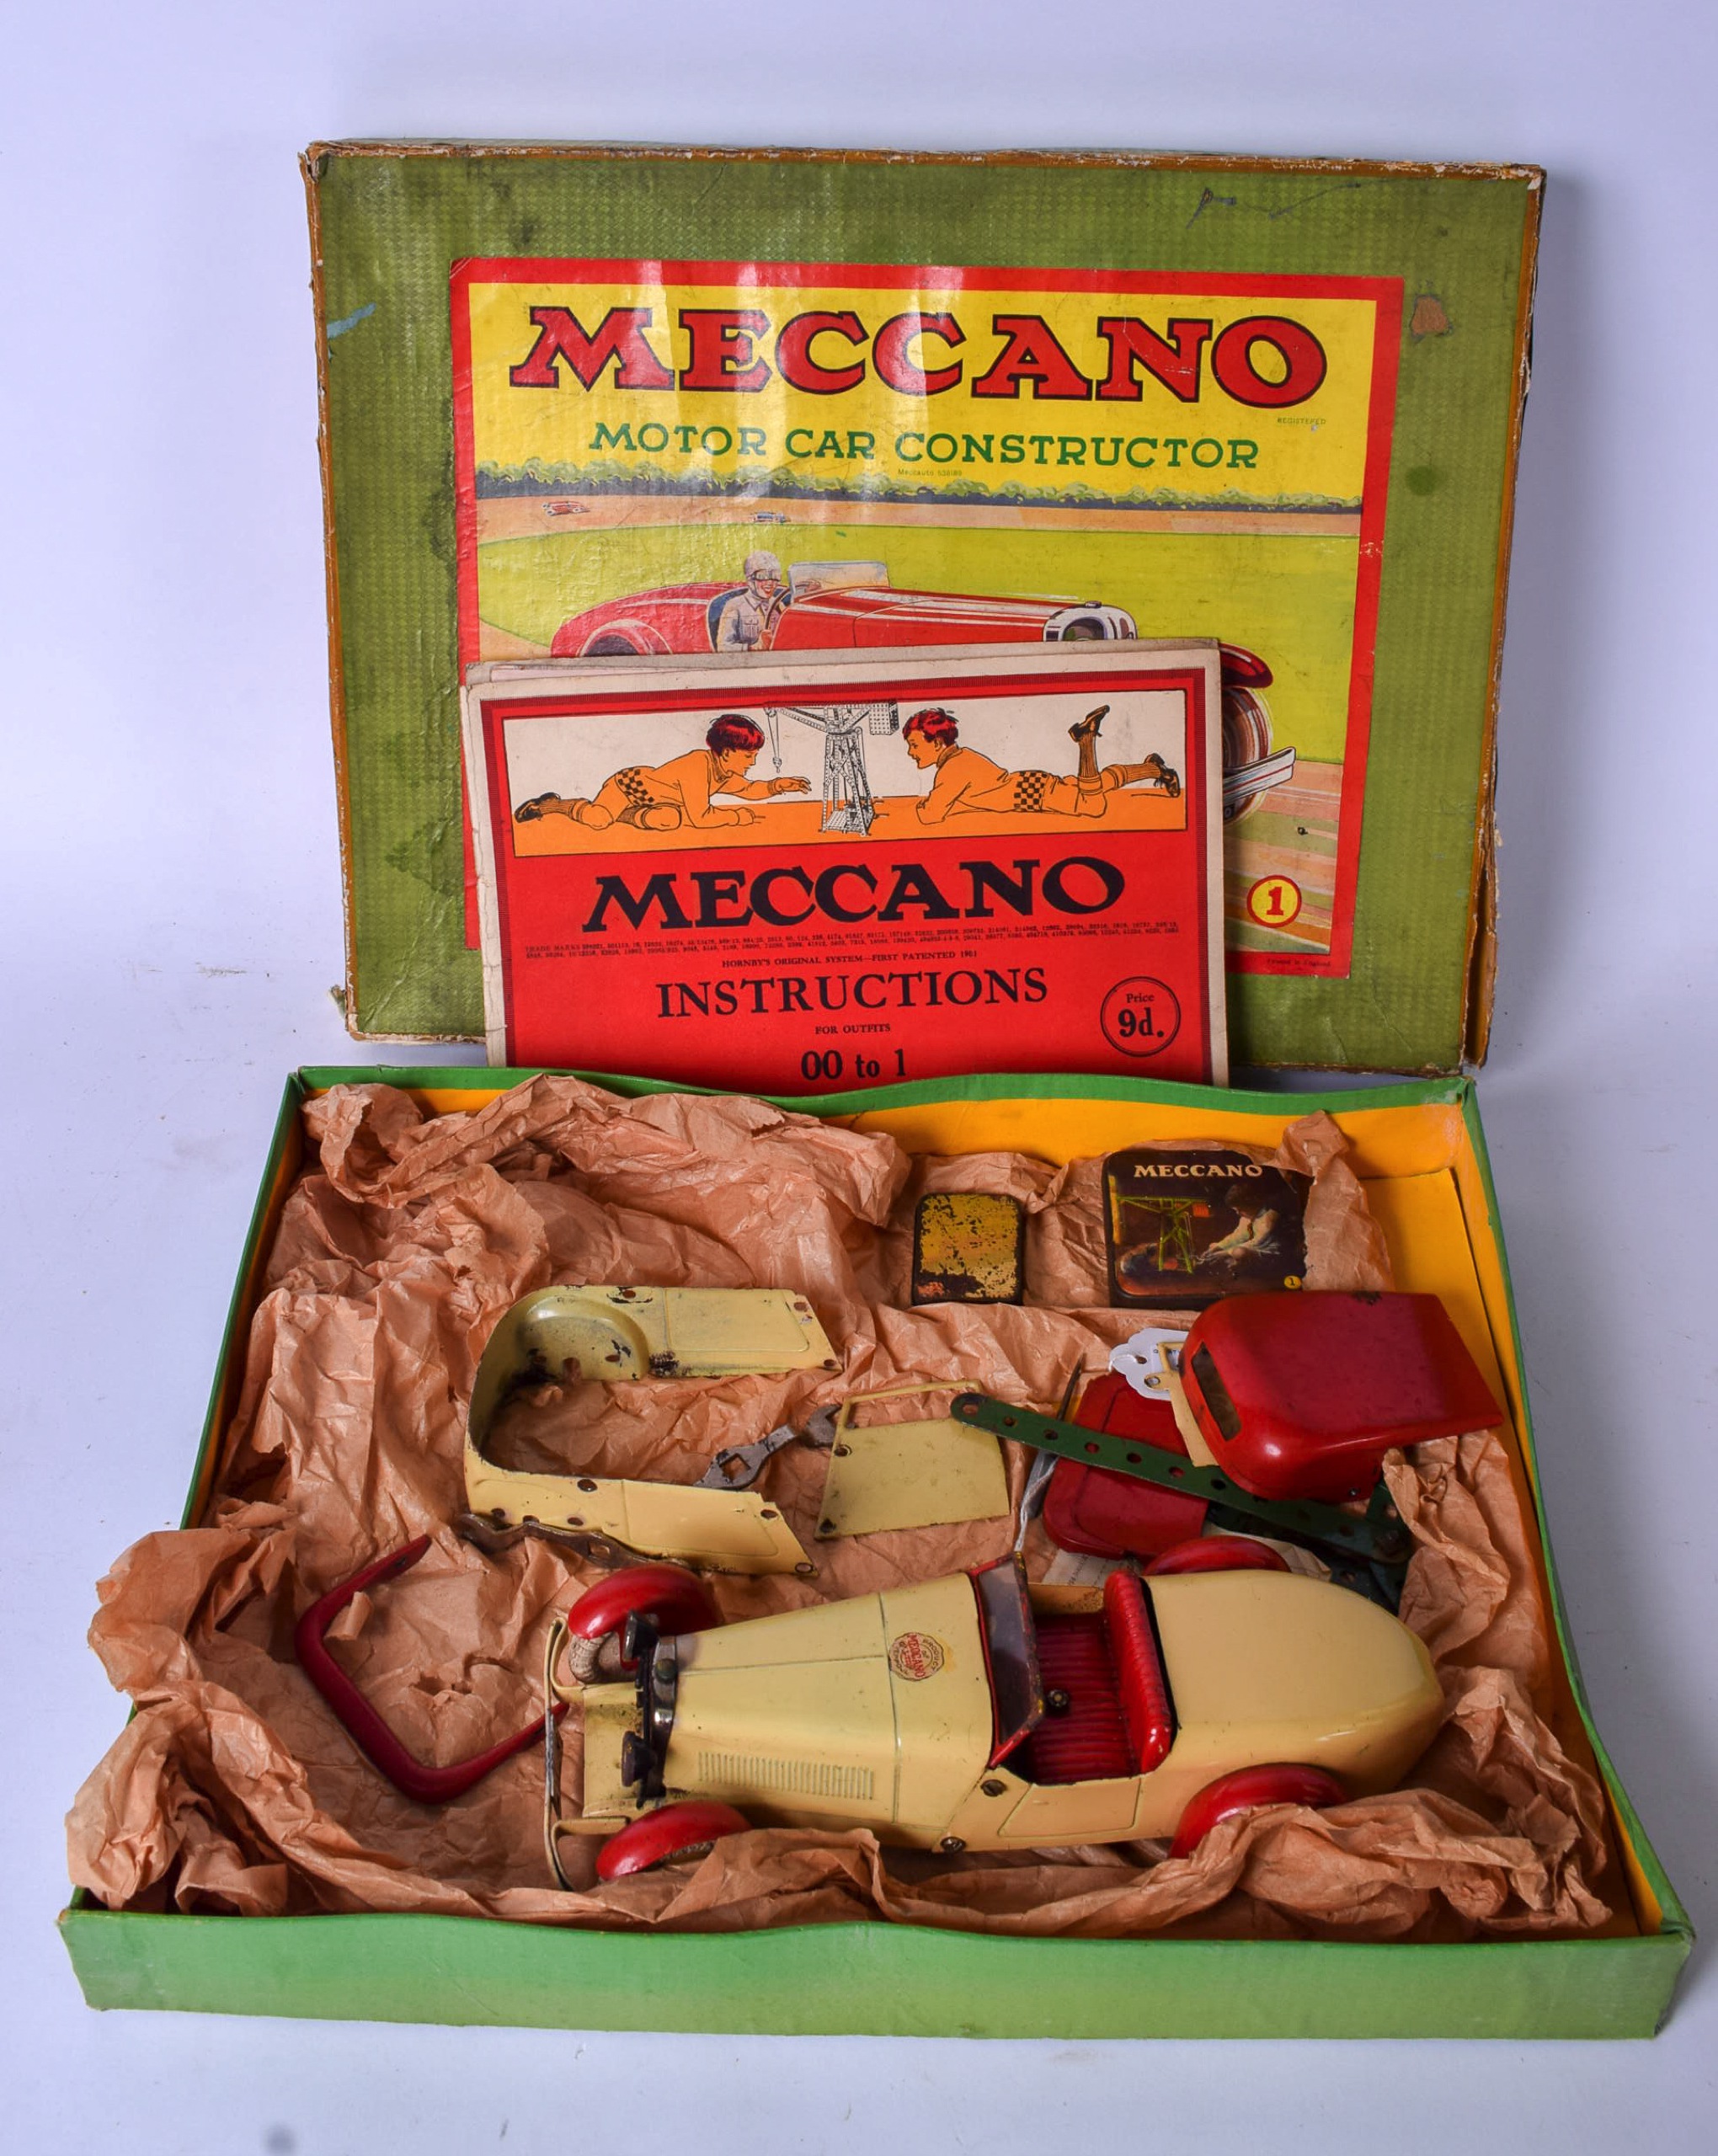 A RARE MECCANO MOTOR CAR CONSTRUCTOR KIT, contained within original box. - Image 2 of 5